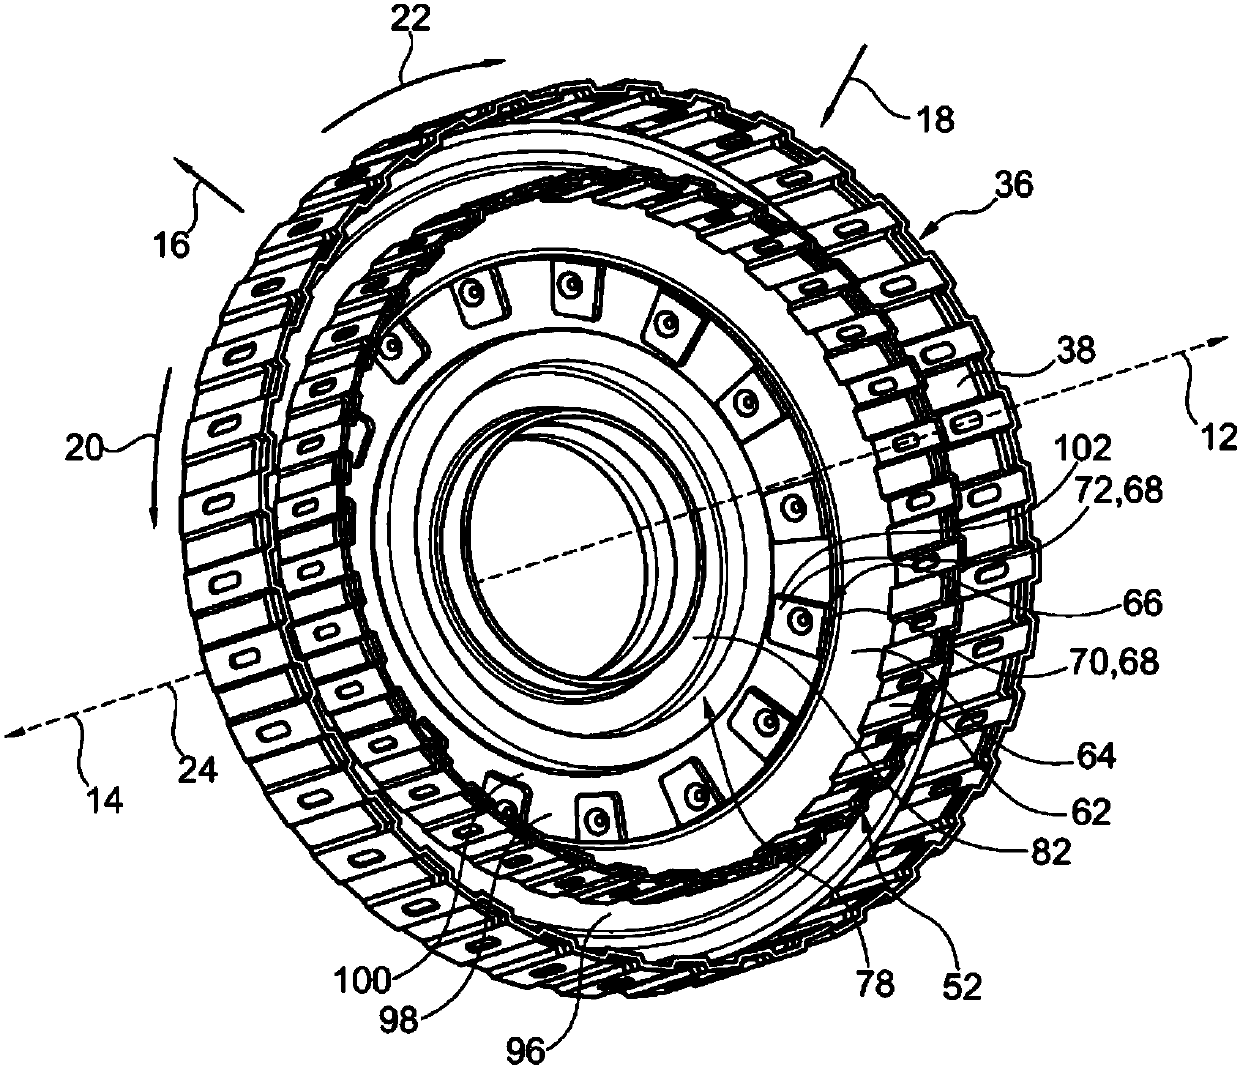 Concentric dual clutch device